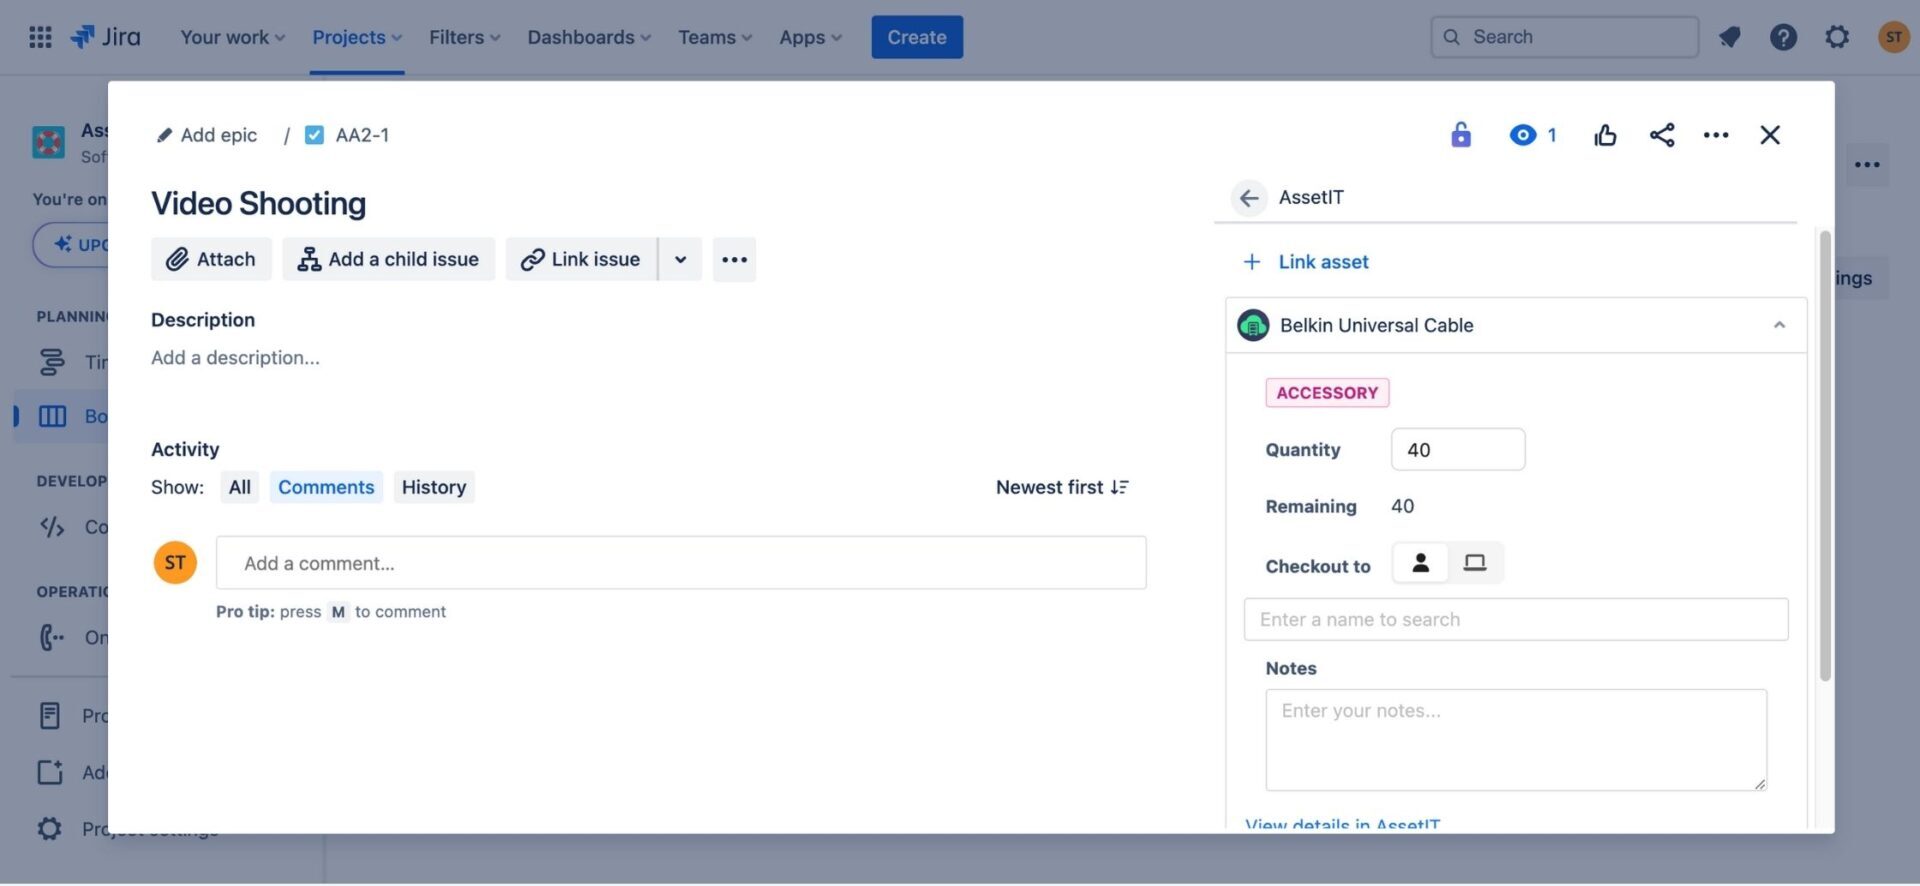 AssetIT seamlessly integrates with the Jira platform to improve the workflow